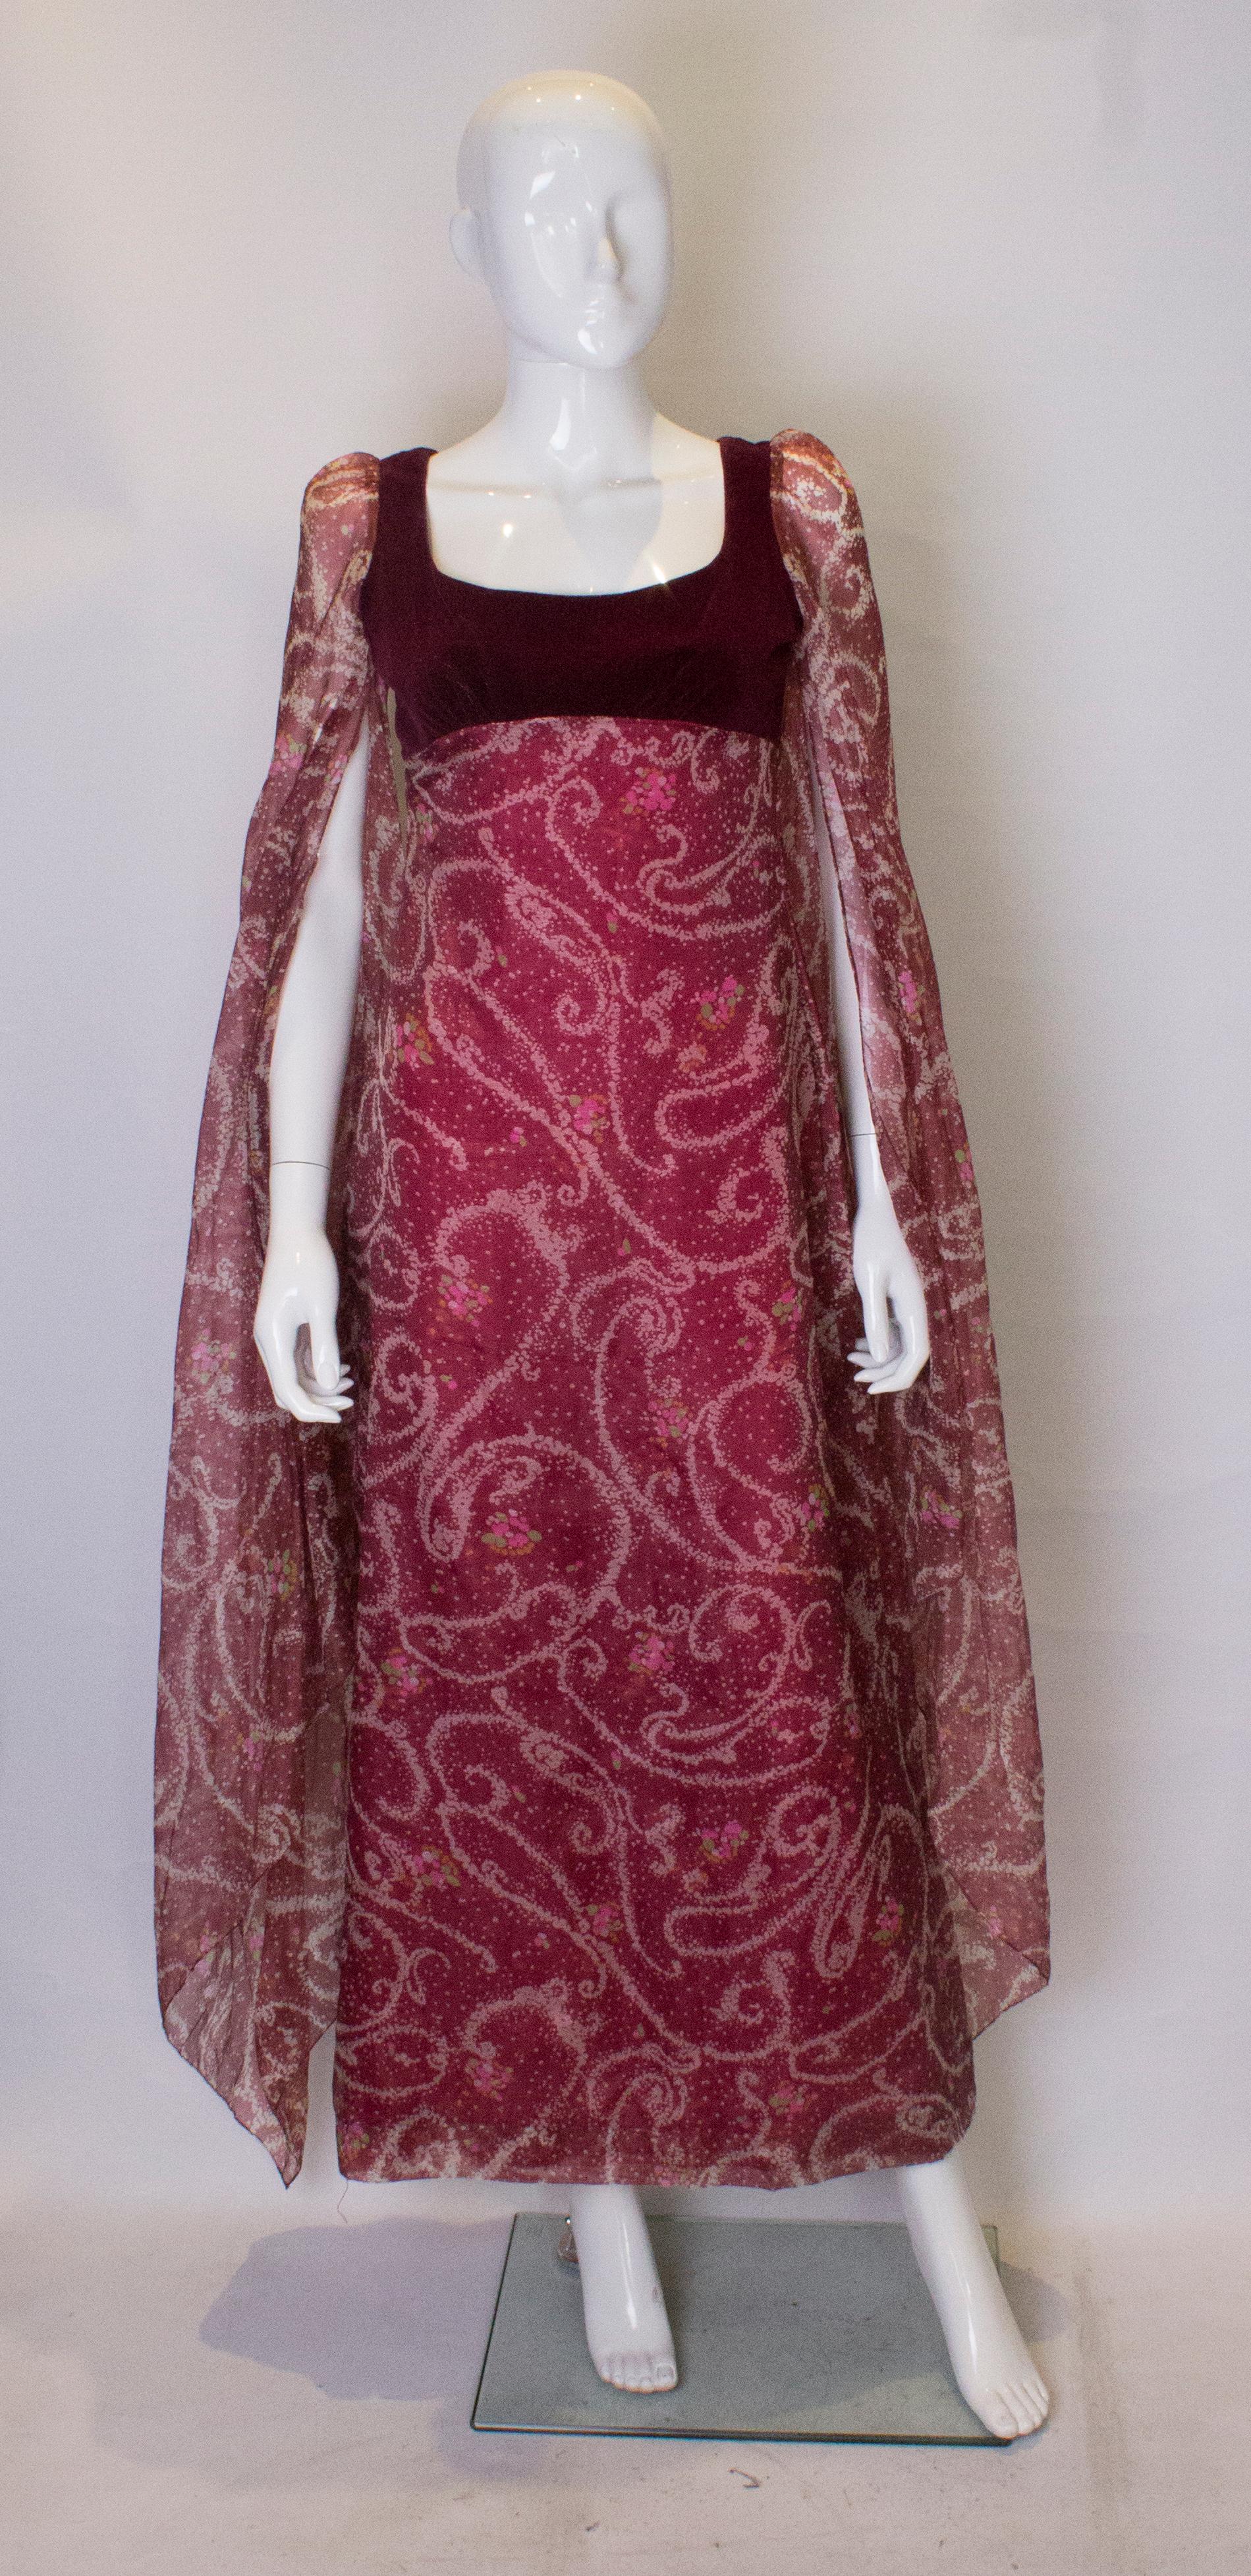 A stunning gown by British design house Quad. The gown has a burgundy velvet bust area with wonderful long open sleaves in a burgundy, pink, green and ivory print. This print is also on the body of the dress. The gown is fully lined and a has a